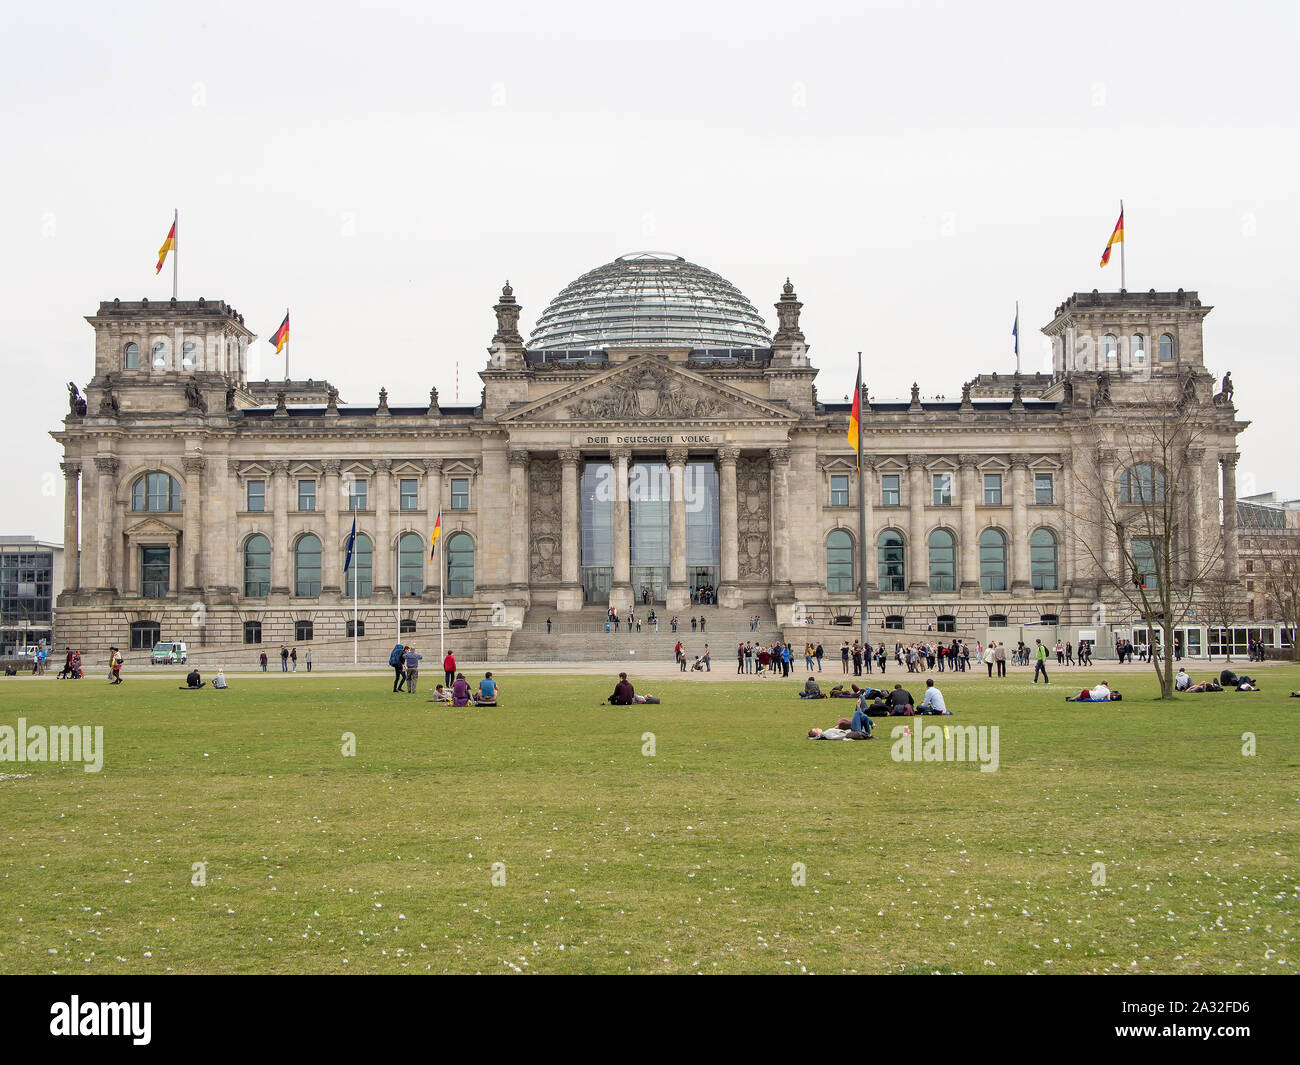 BERLIN, GERMANY - APRIL 4, 2016: Tourists In Front of Berlin Reichstag, Home of The German Parliament Bundestag Stock Photo